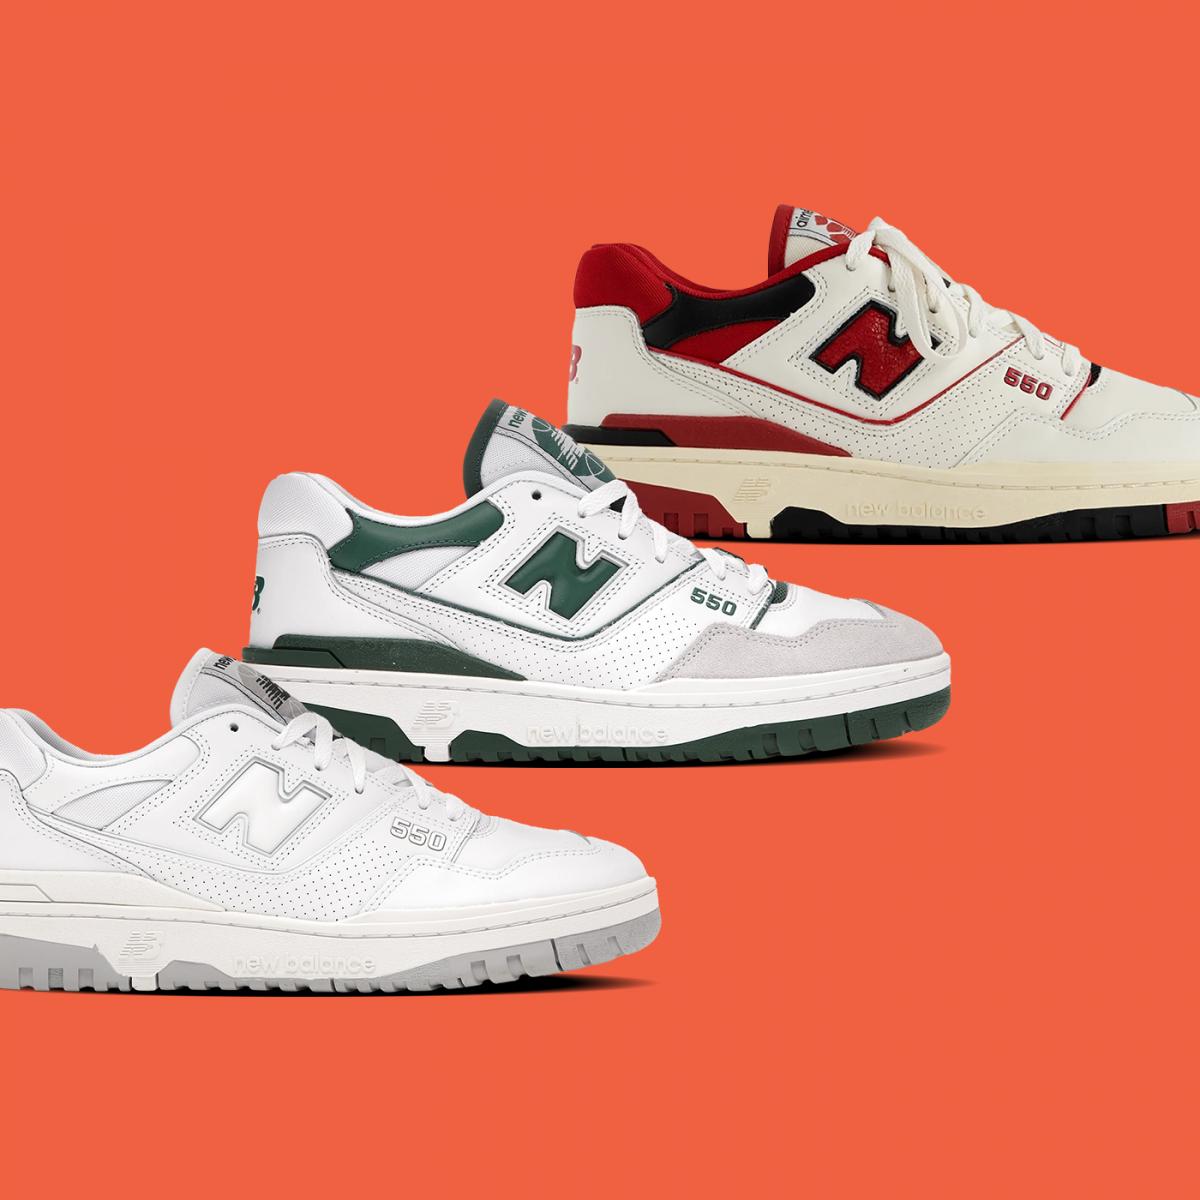 Looking for modern New Balance outfits? Style your New Balance 550